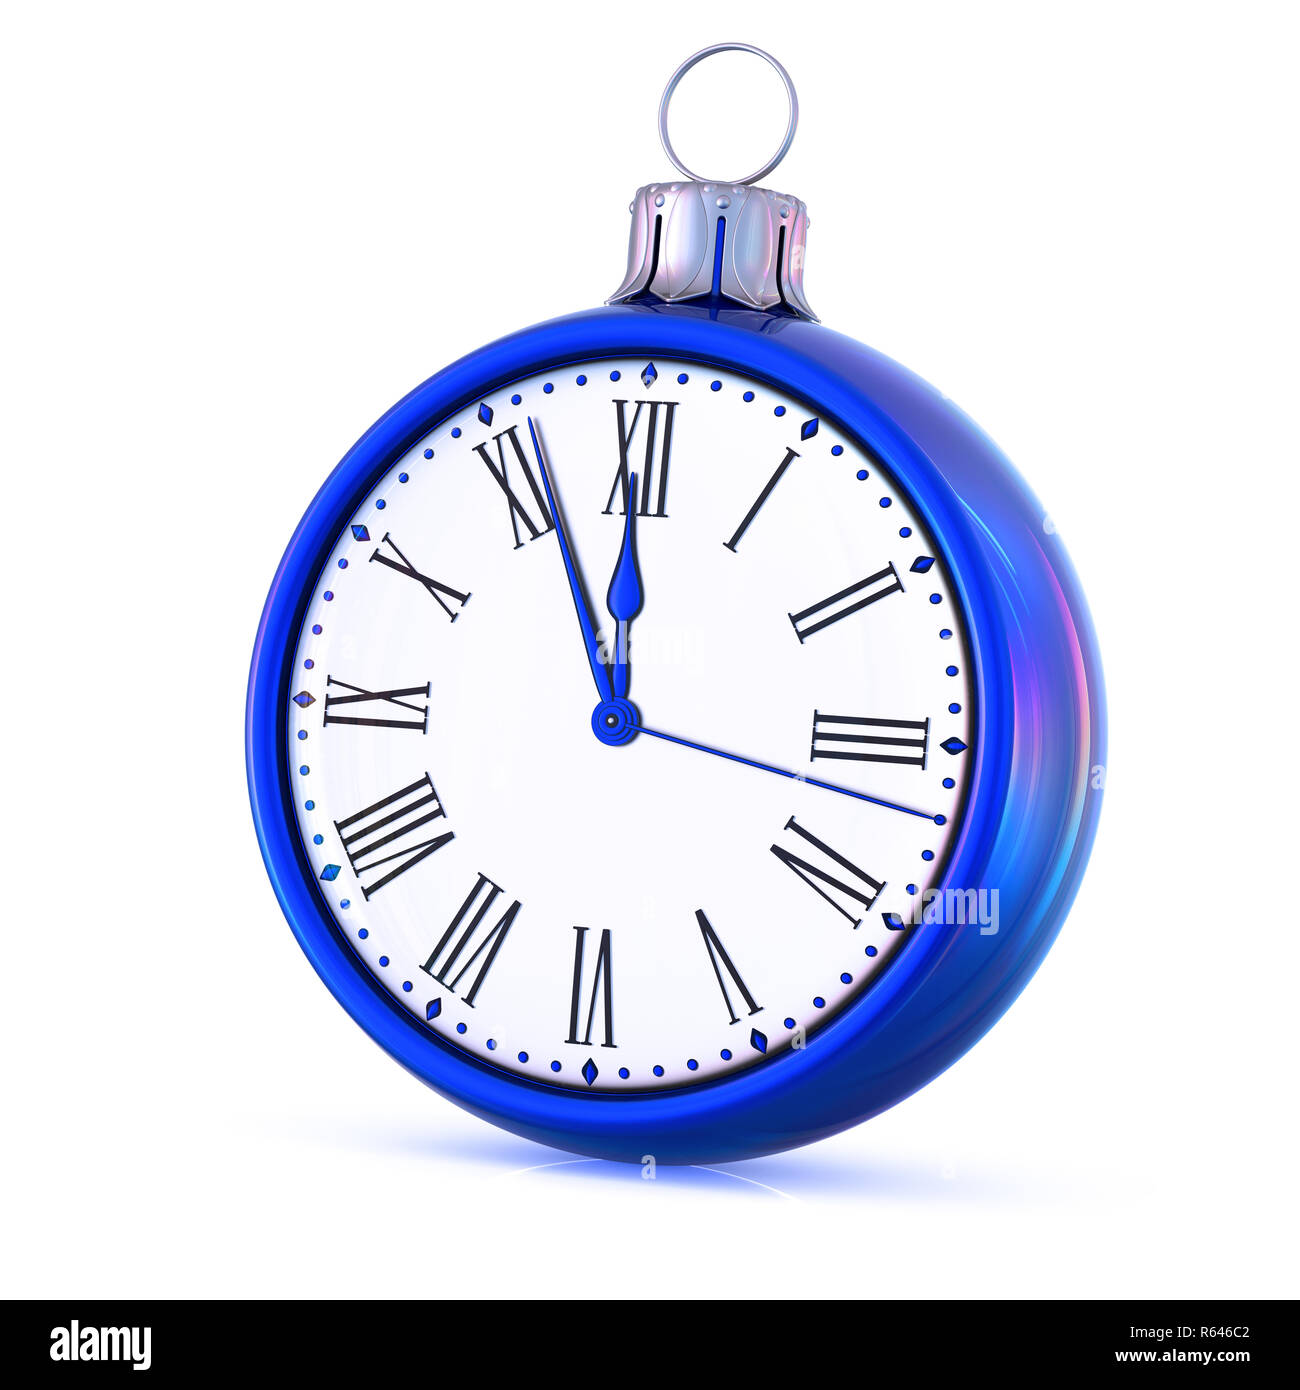 Clock New Year's Day last hour midnight time countdown pressure, Christmas ball decoration ornament blue silver adornment bauble. Happy wintertime hol Stock Photo